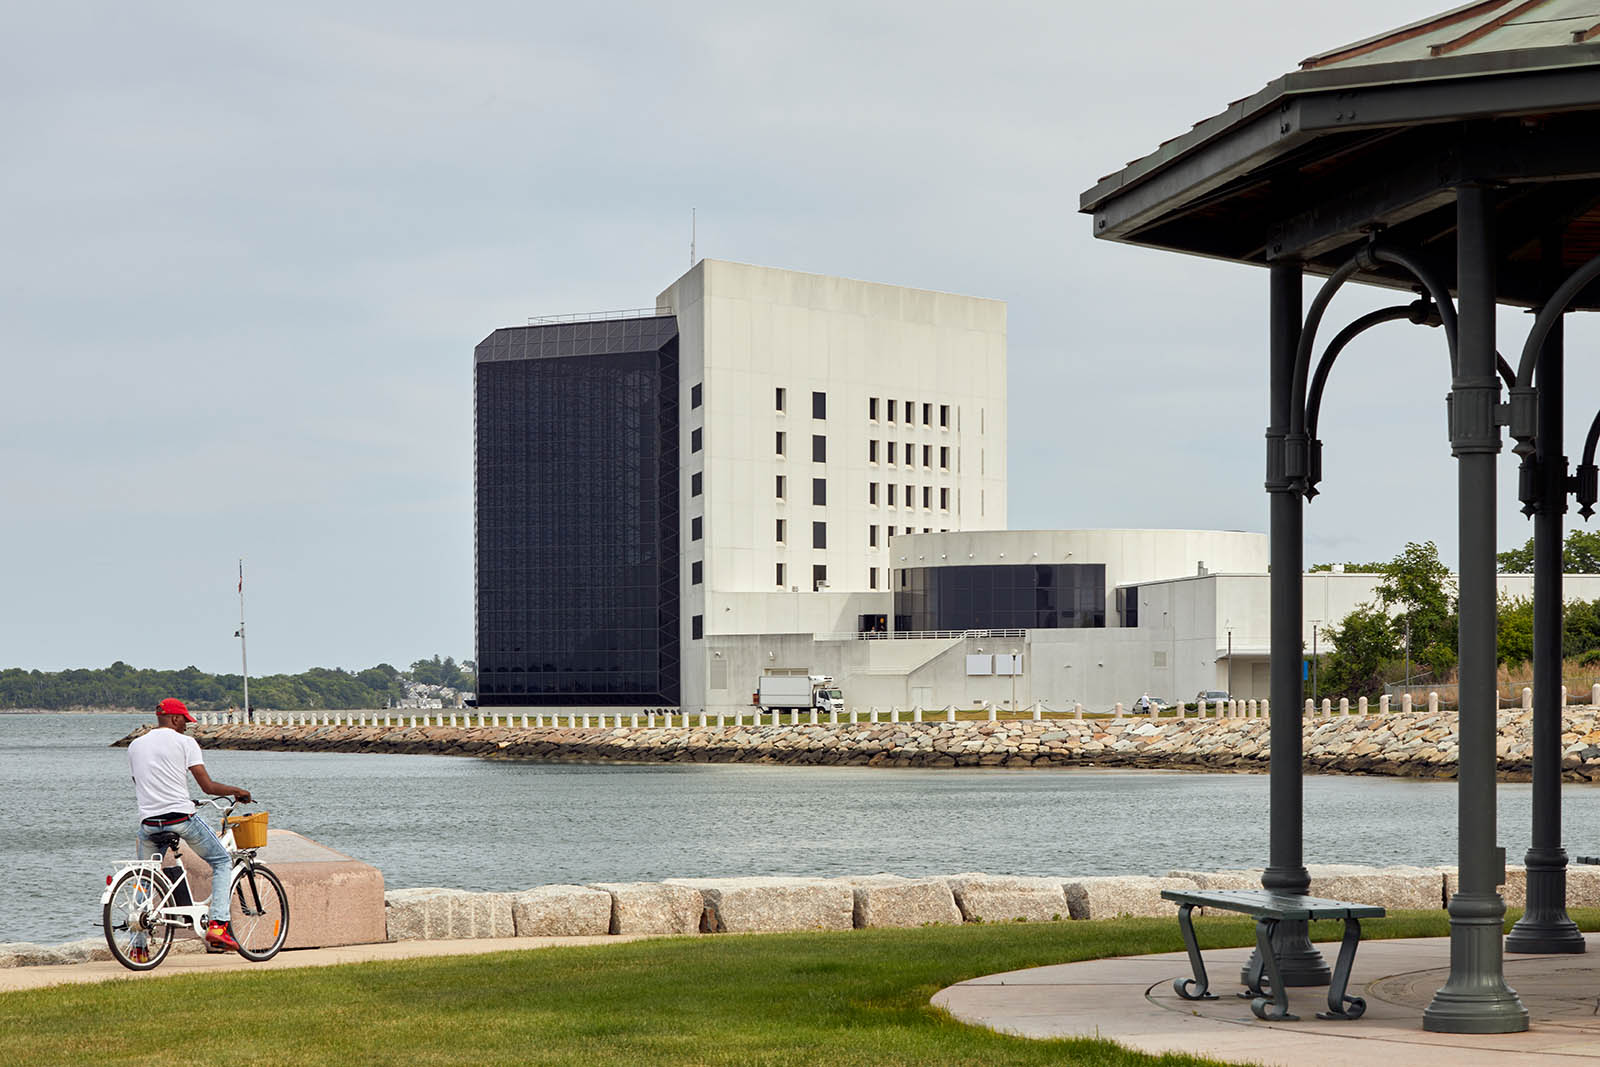 Photo of a half glass and have concrete building, a bay in front of it with a man on a bicycle looking at the building across the bay. A gazebo is shown on the right side of the photo